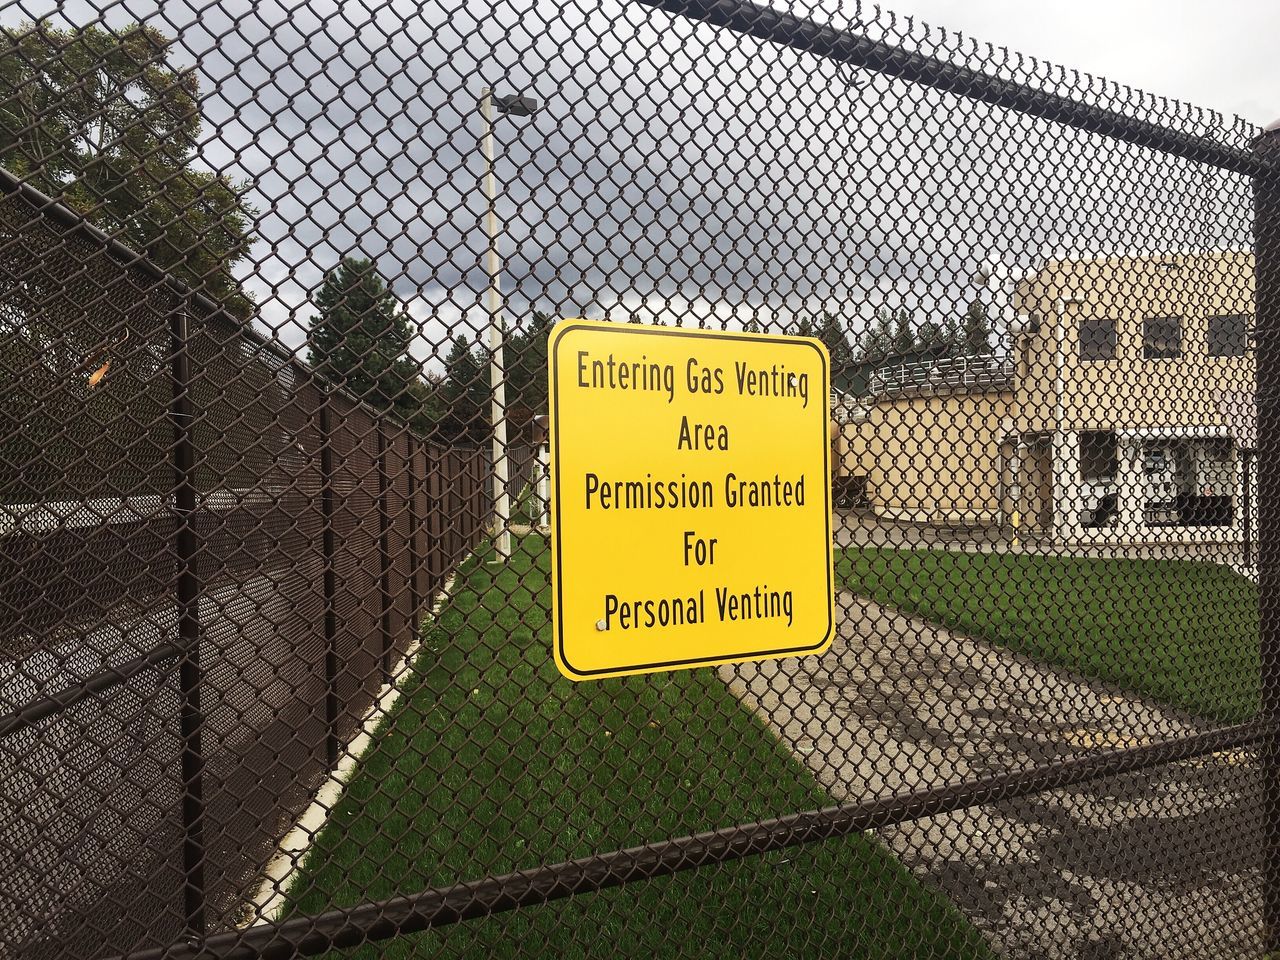 CLOSE-UP OF INFORMATION SIGN ON CHAINLINK FENCE AGAINST SKY